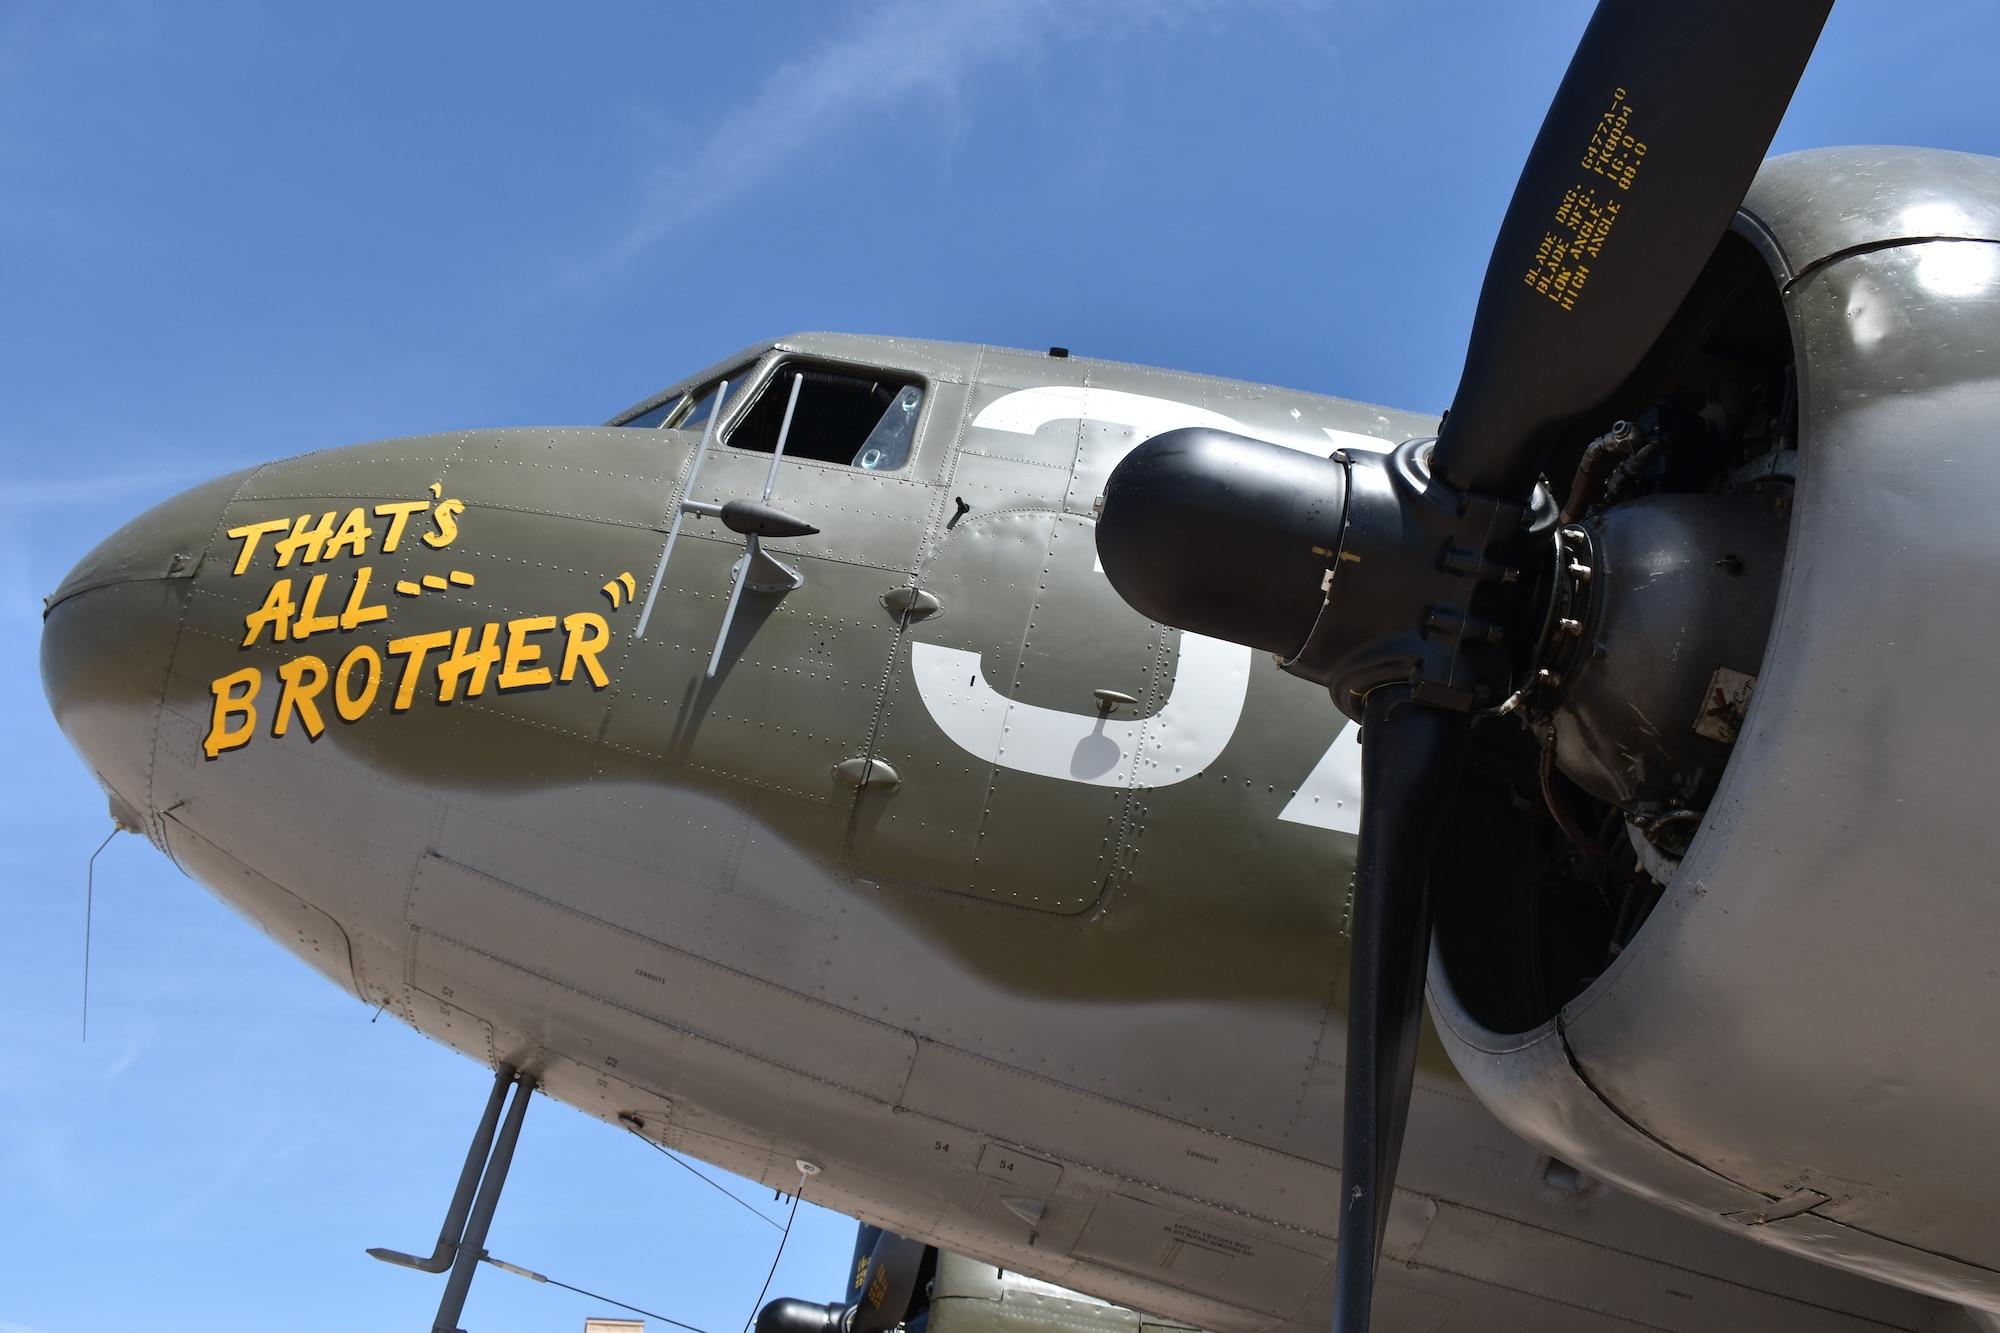 The C-47 That’s All, Brother aircraft, sits on display on the flightline during the 2023 Dyess Big Country Air Fest rehearsal day at Dyess Air Force Base, Texas, April 21, 2023. More than 30,000 event goers attended the one-day event highlighting the best of America’s only Lift and Strike base, Air Force heritage and Dyess community partners. The air show featured the F-22 Raptor demo team, U.S. Air Force Academy Wings of Blue, U.S. Army Golden Knights, WWII heritage flight and B-1B Lancer and C-130J Super Hercules fly overs. (U.S. Air Force photo by Staff Sgt. Matthew Angulo)